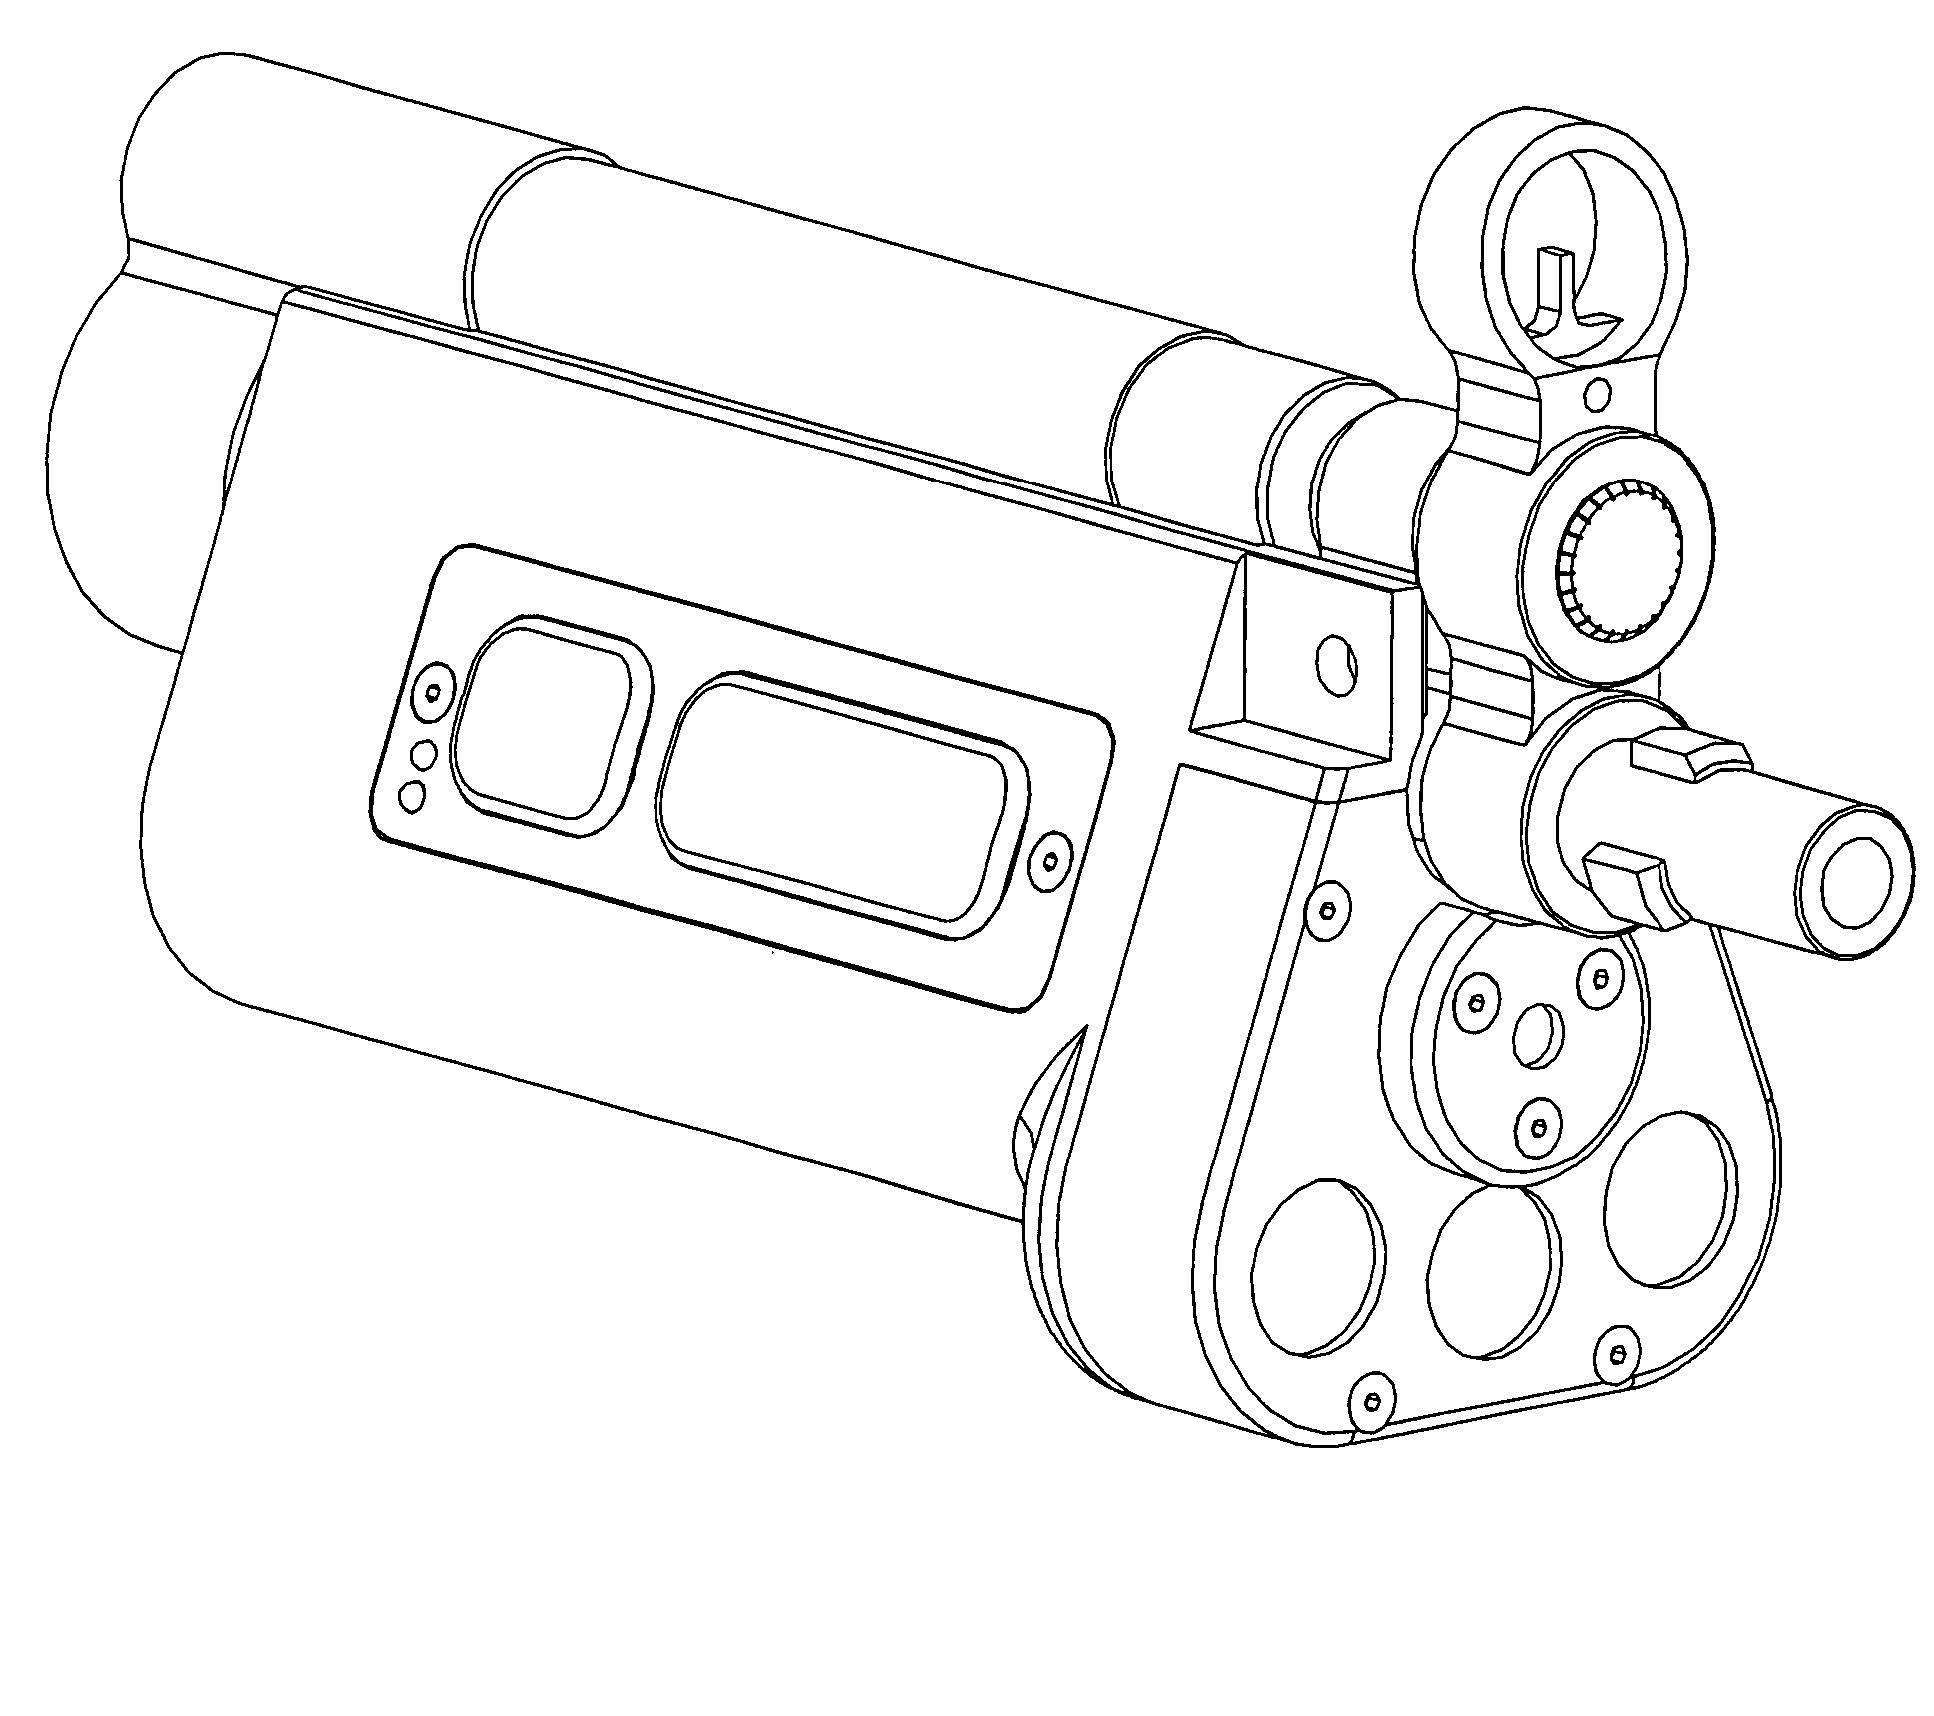 Target illumination and sighting device with integrated non-lethal weaponry